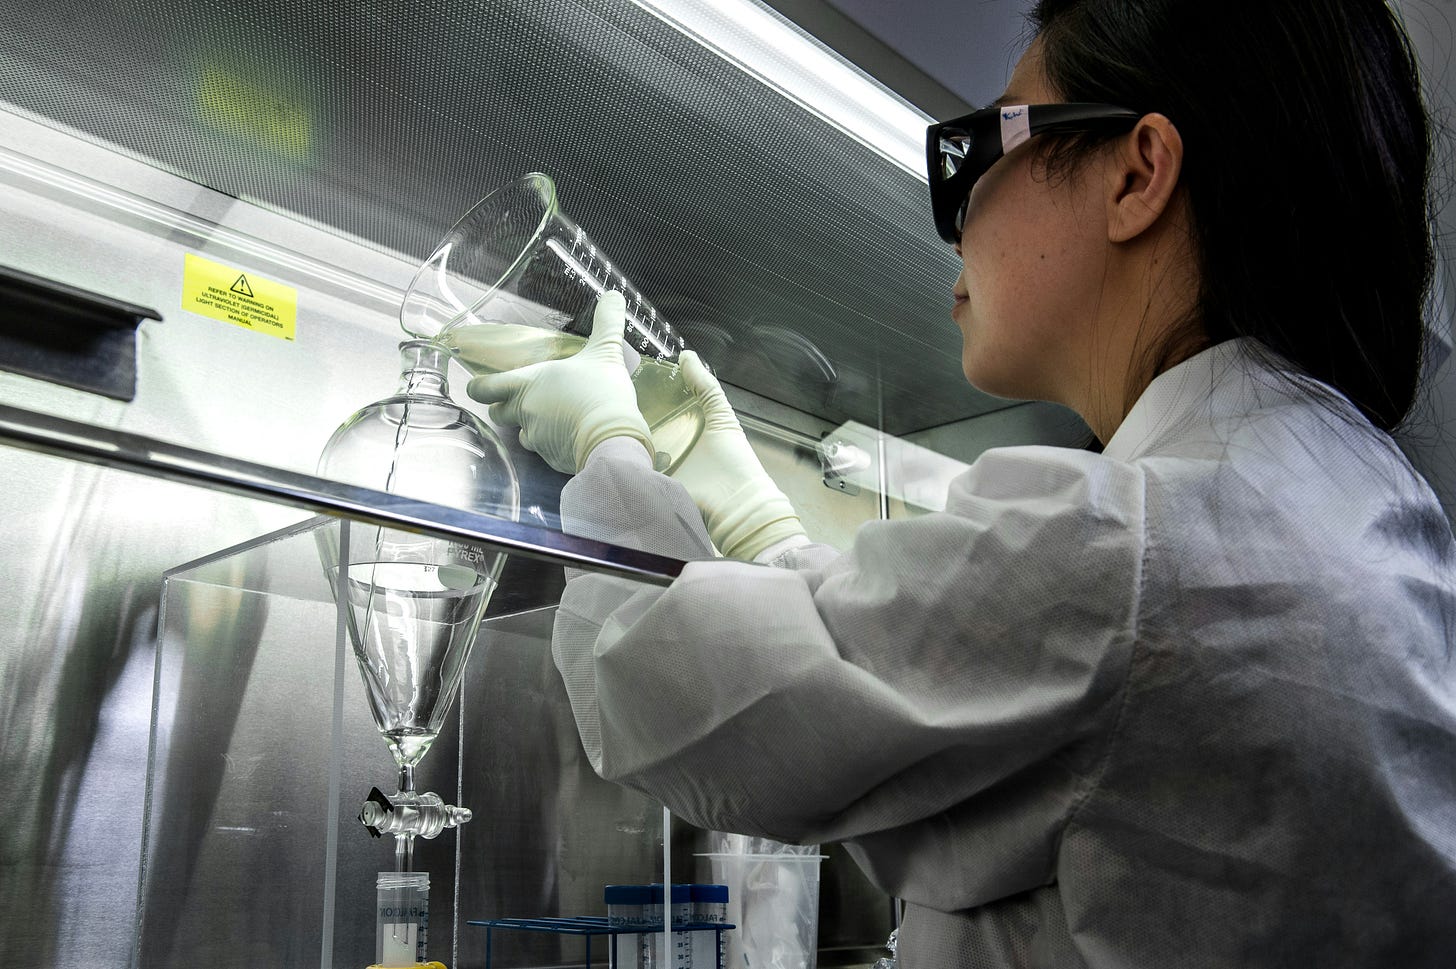 Woman wearing lab gear pouring liquid from one glass container to another behind a glass barrier